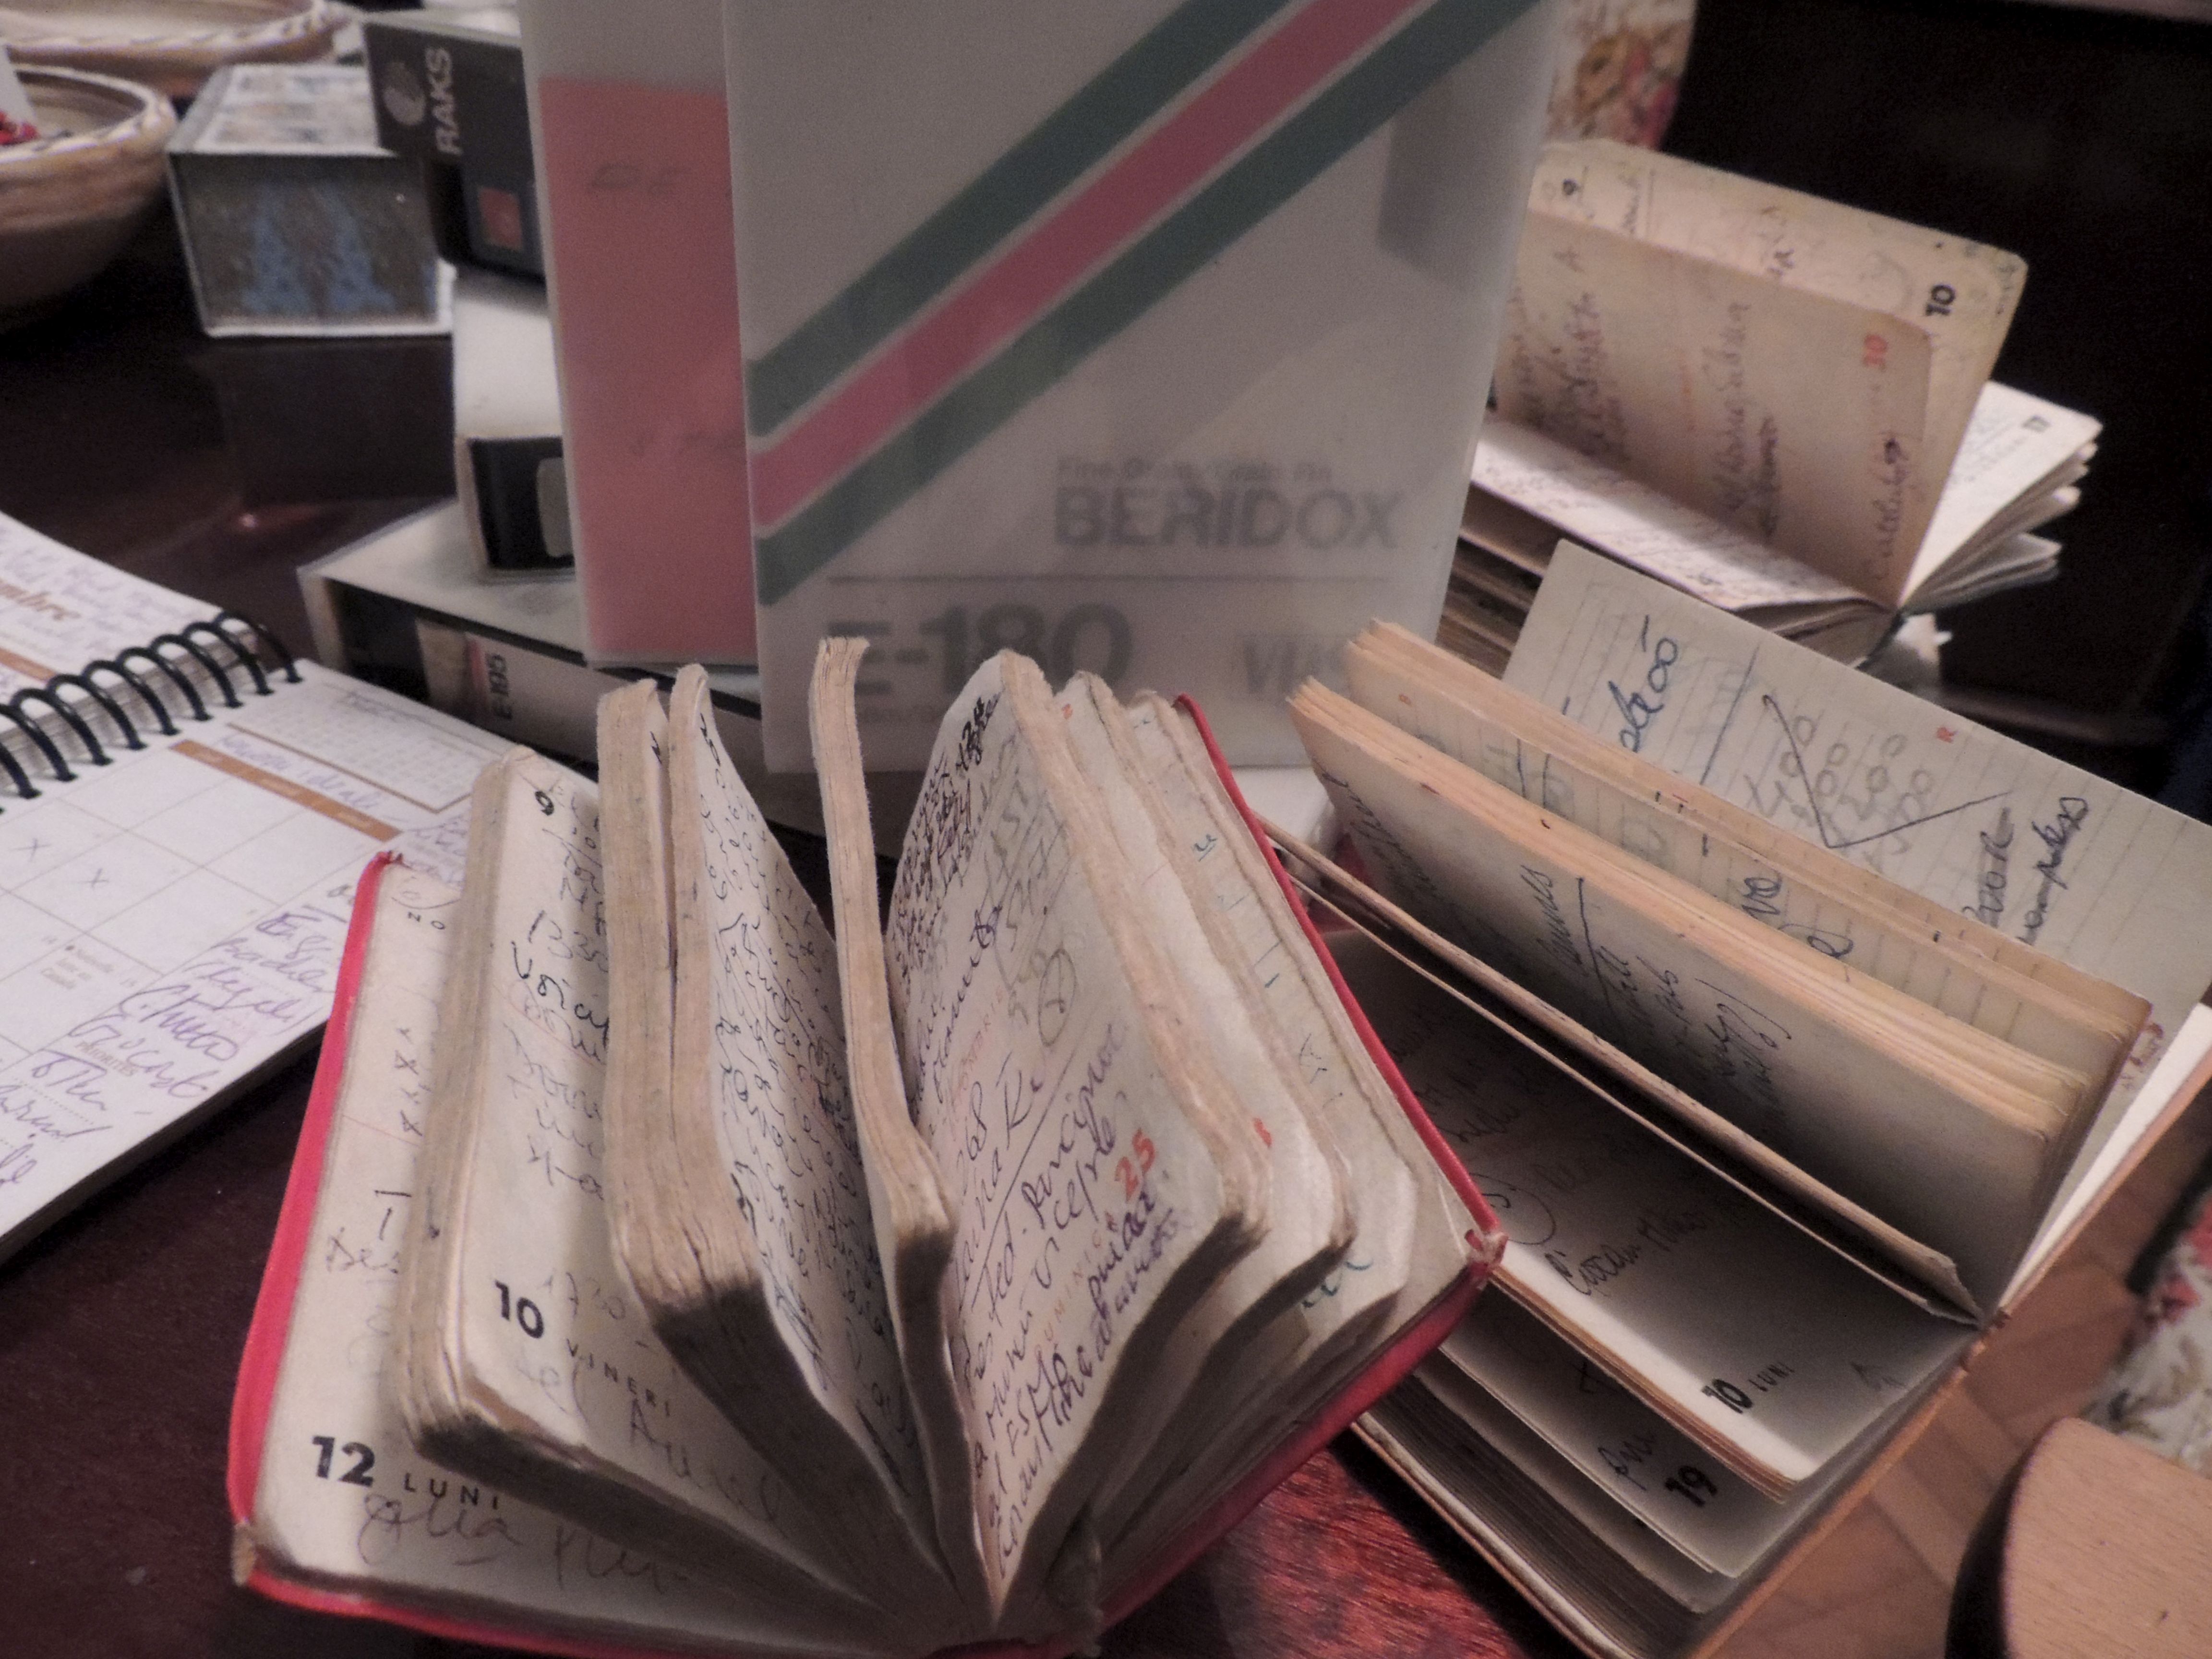 Notebooks including all the titles of the films which Irina Margareta Nistor translated